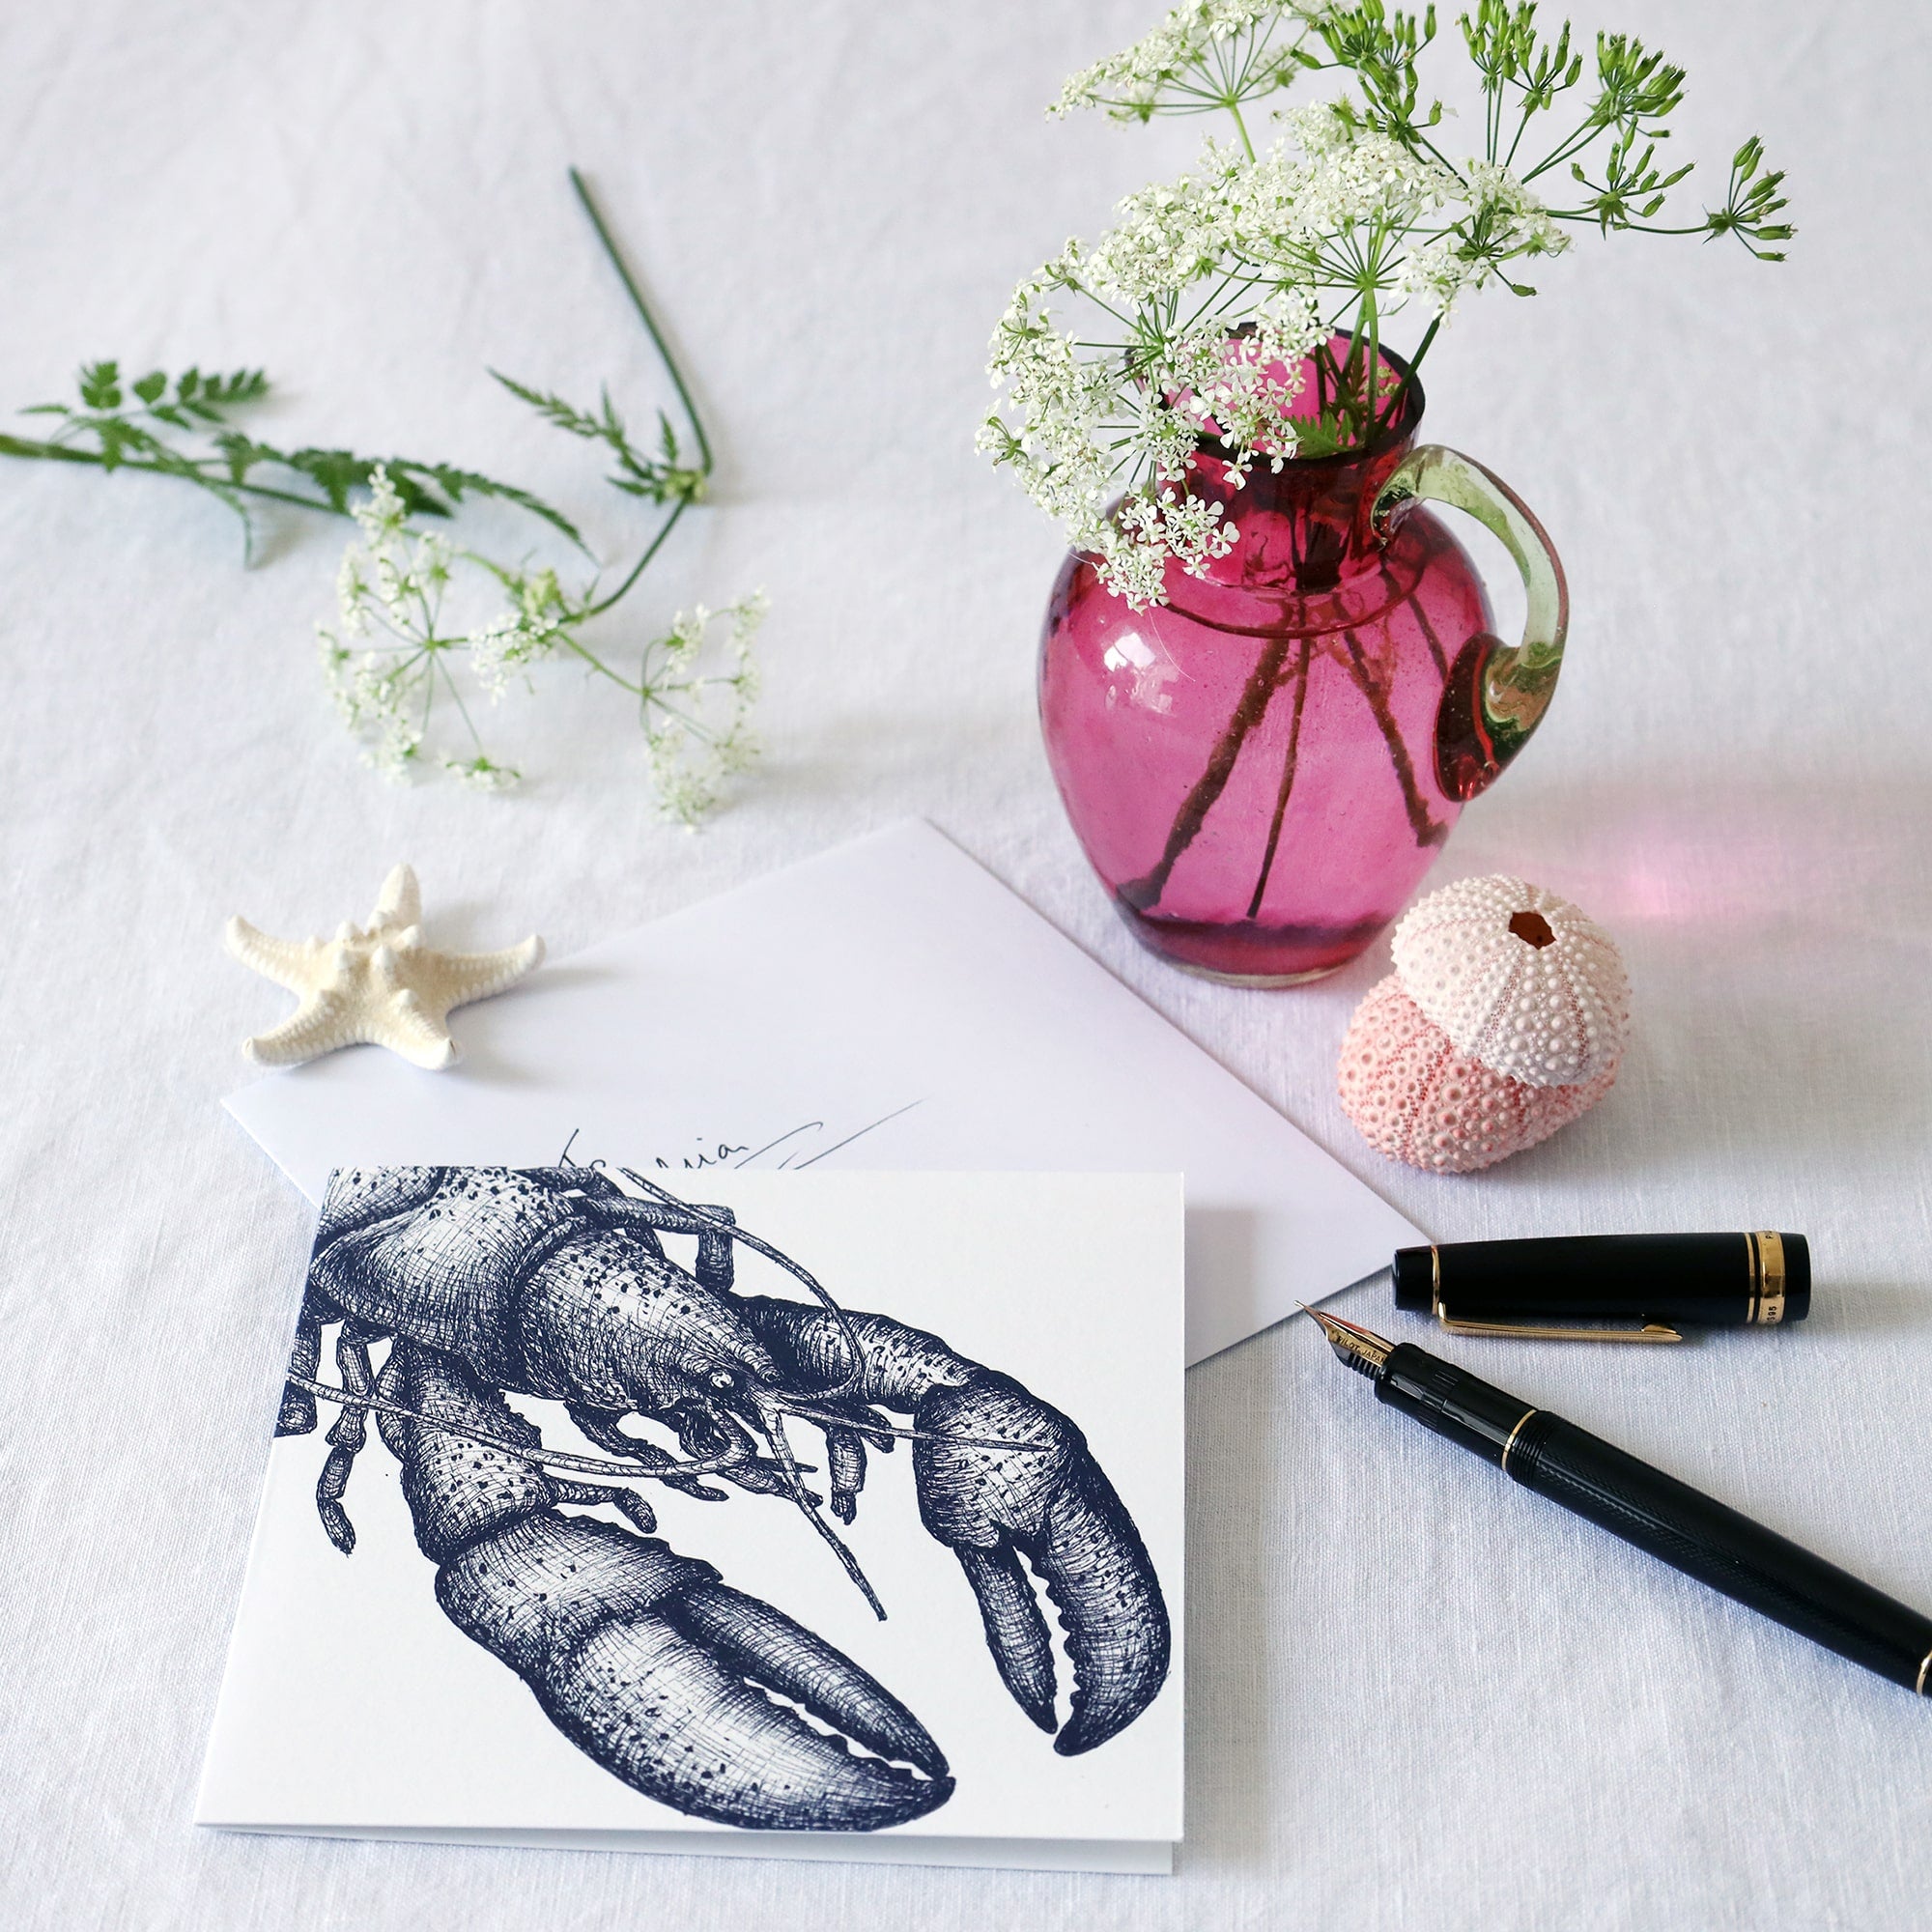 greeting card with navy illustrated lobster on white background lying on a white table cloth with a fountain pen, hand written envelope shells and a small cranberry glass jug with wild flowers in 